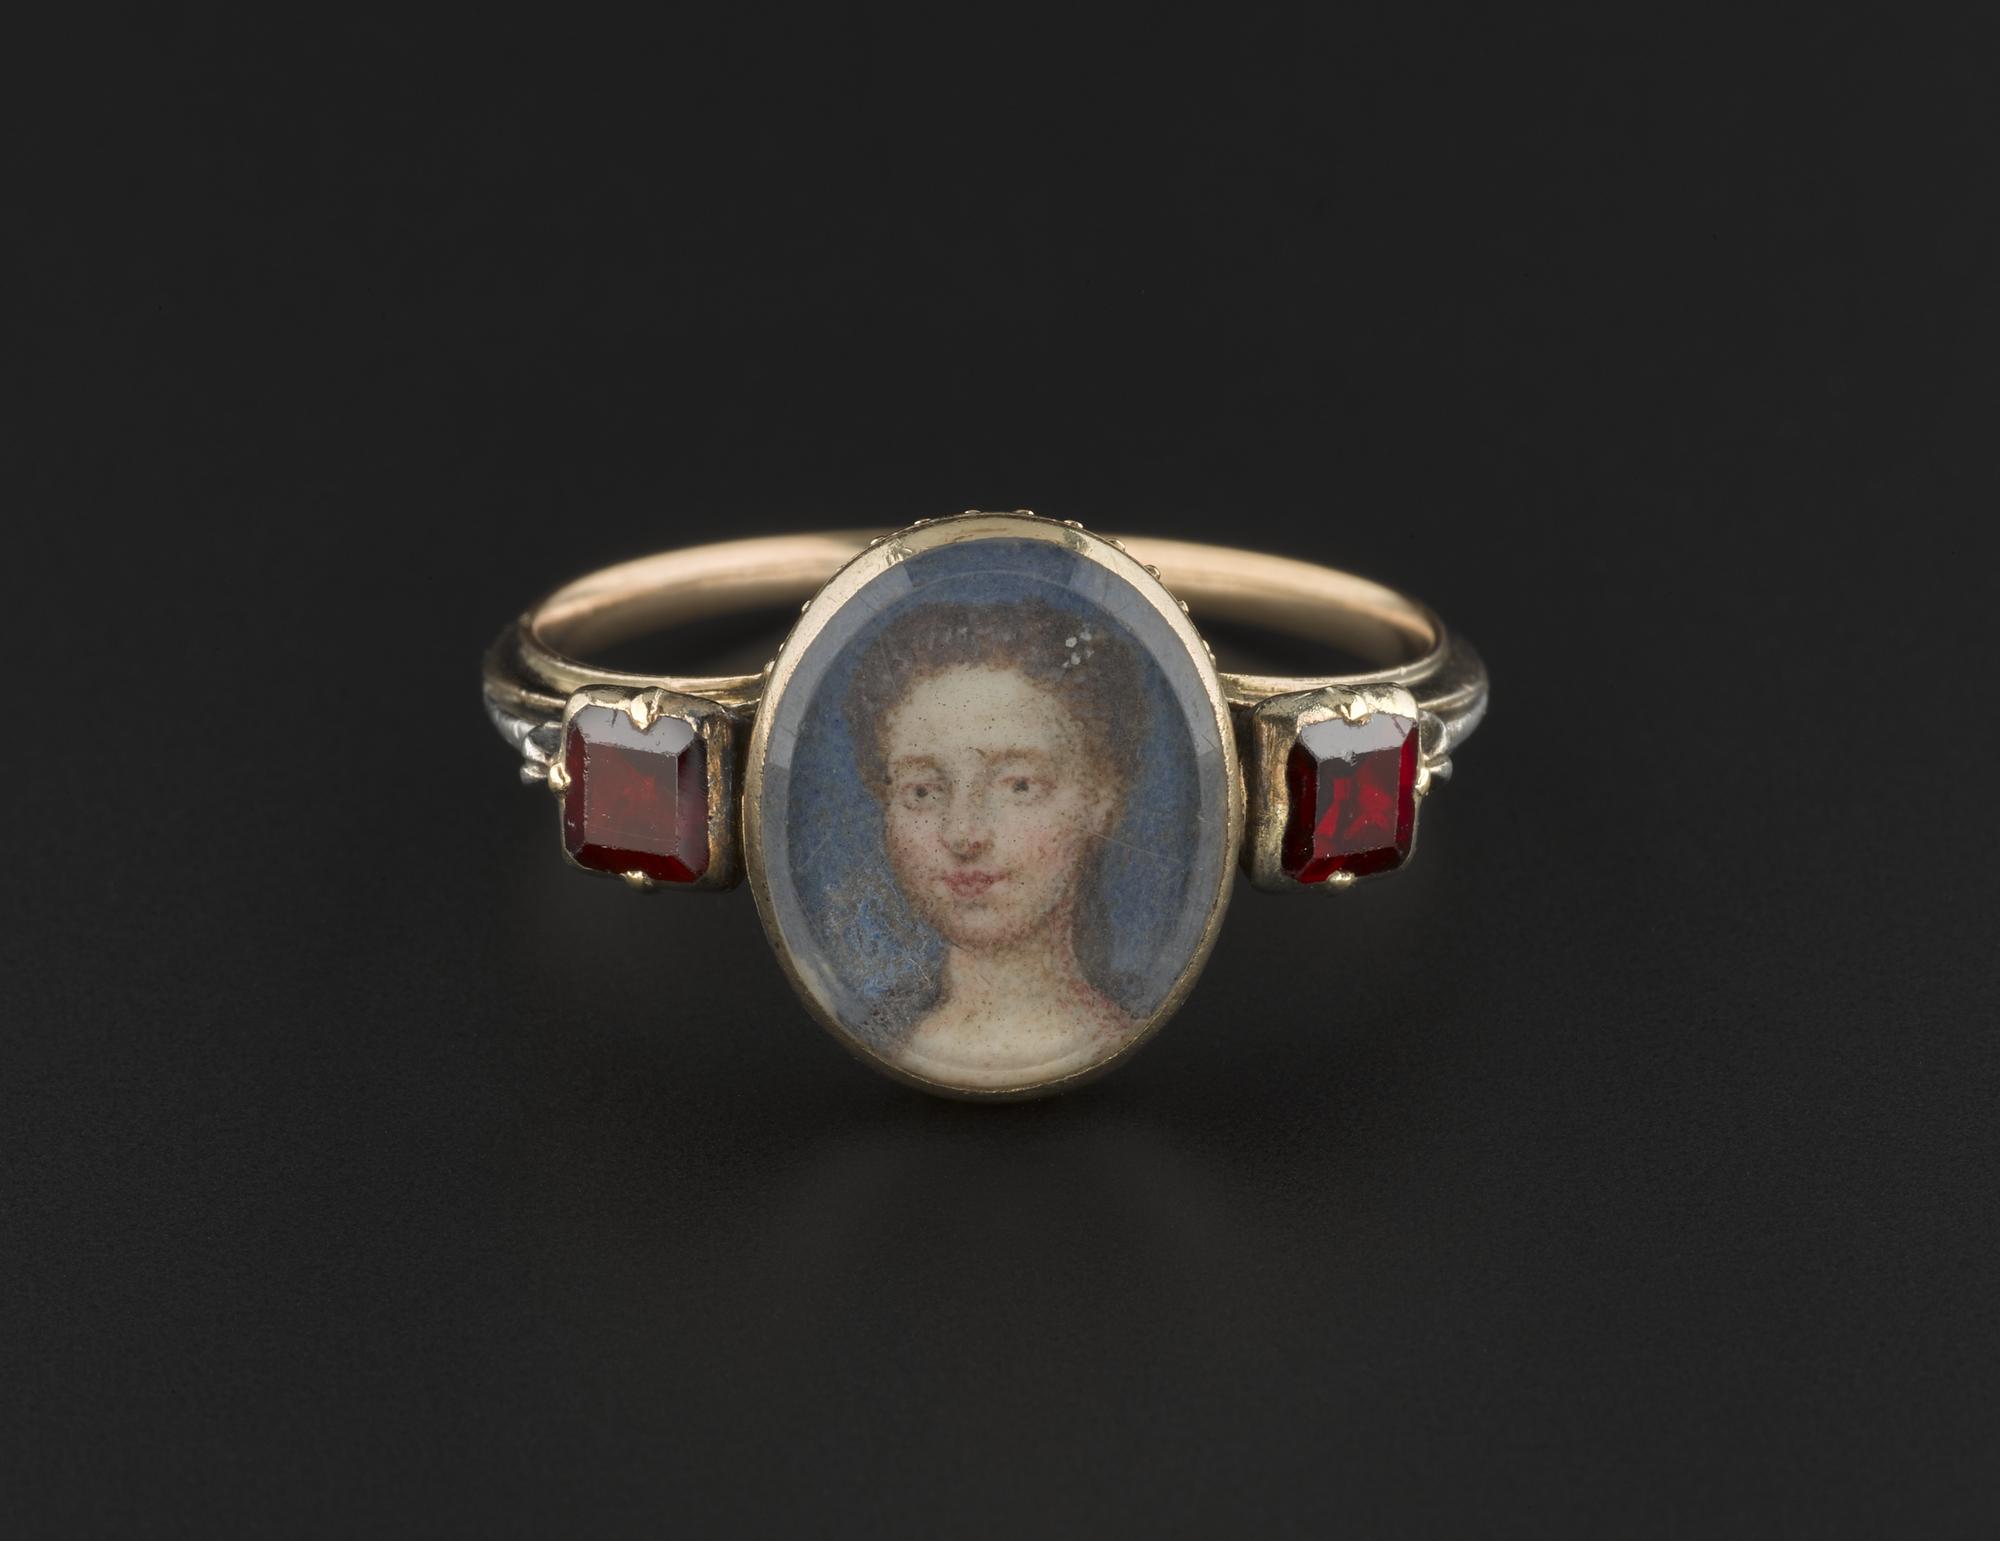 Golden ring with miniature portrait